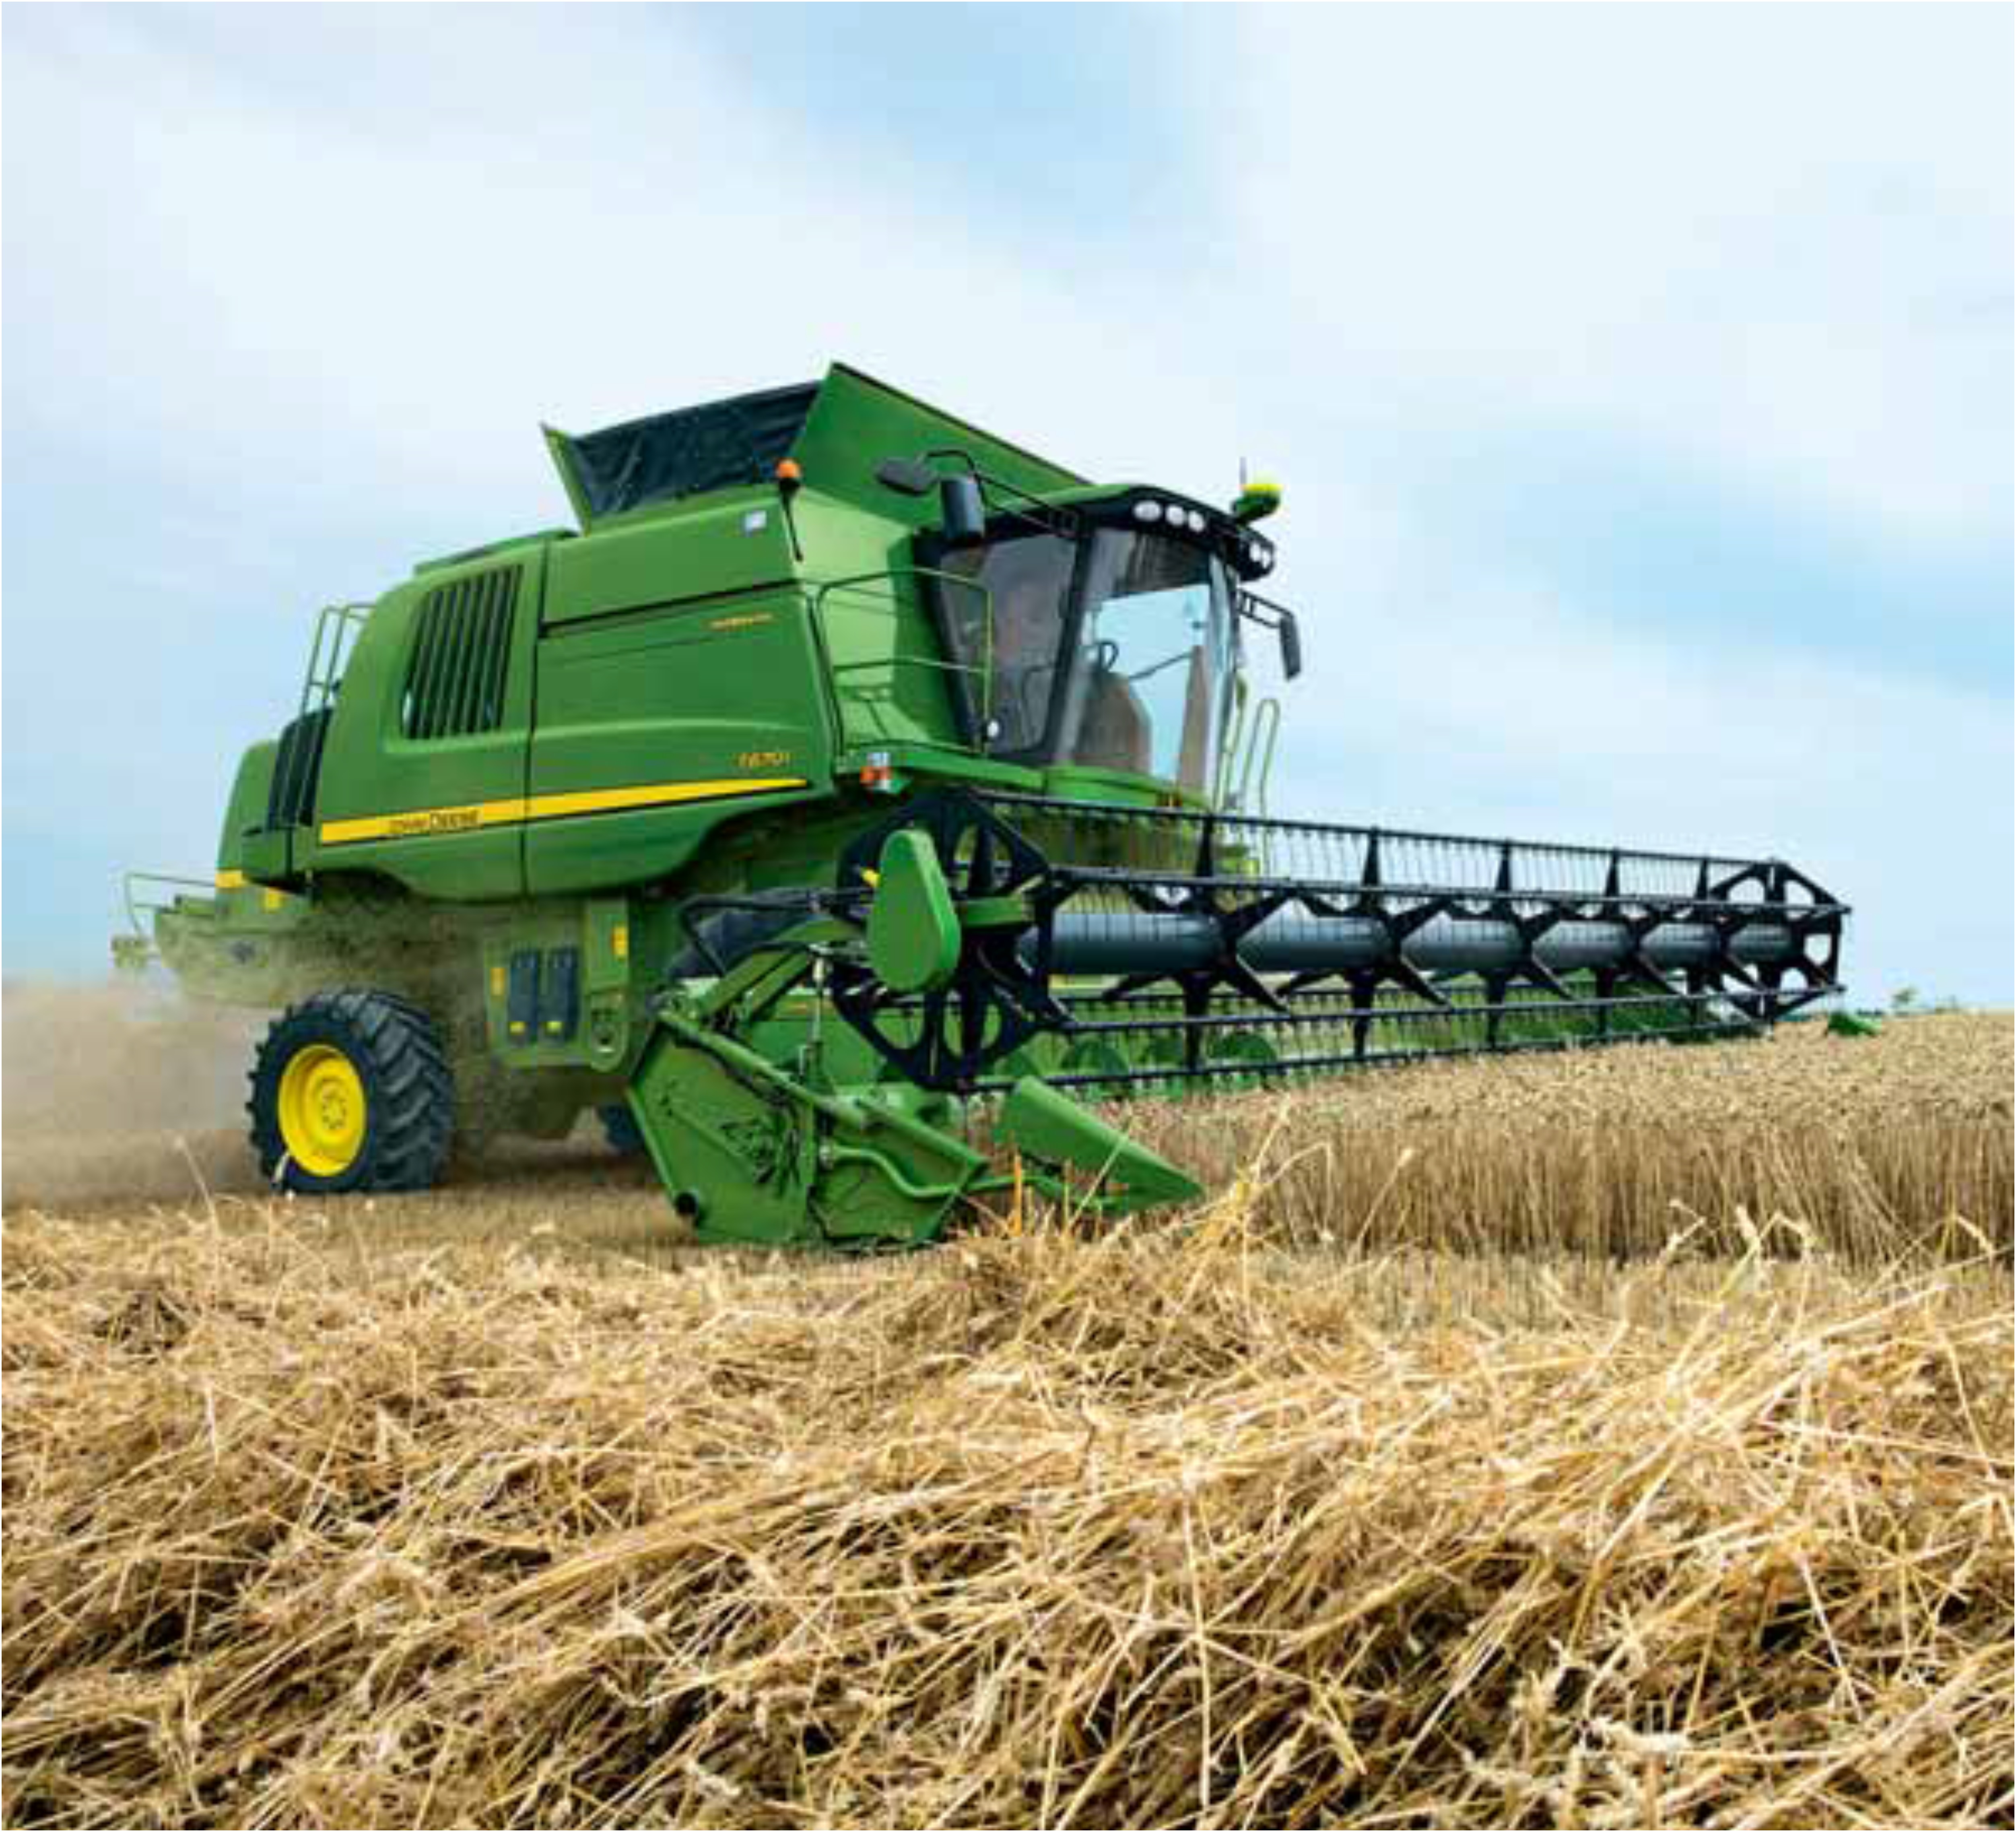 Free photo: Harvester combine - Agriculture, Combine, Countryside ...